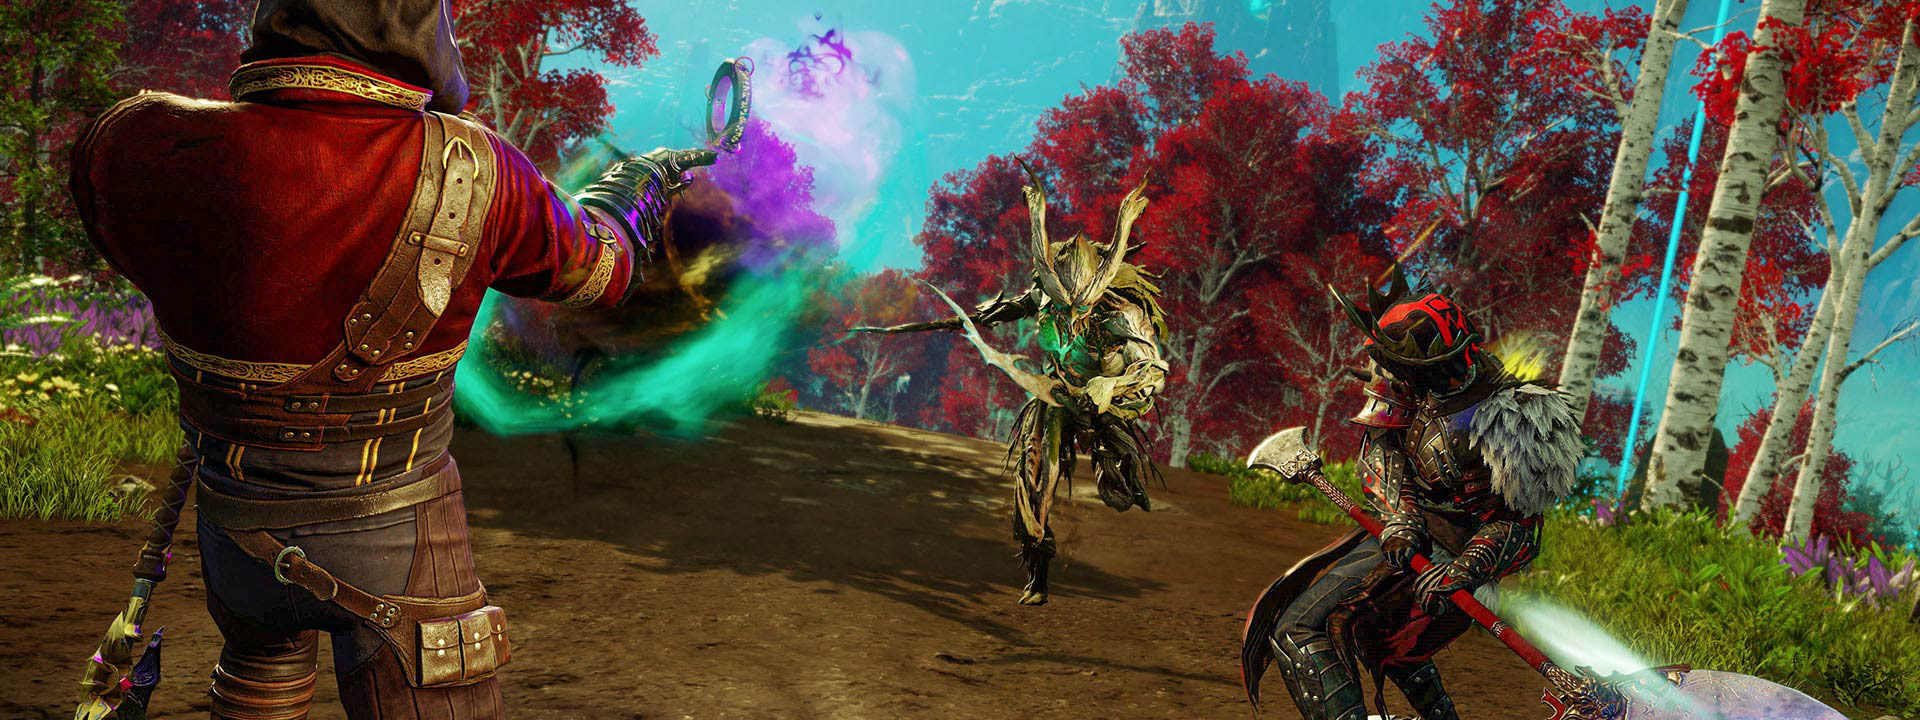 Three characters battle, the one on the left is shooting green and purple mist toward the one in the middle which who is running toward with a sword drawn, the third is standing ready with his weapon